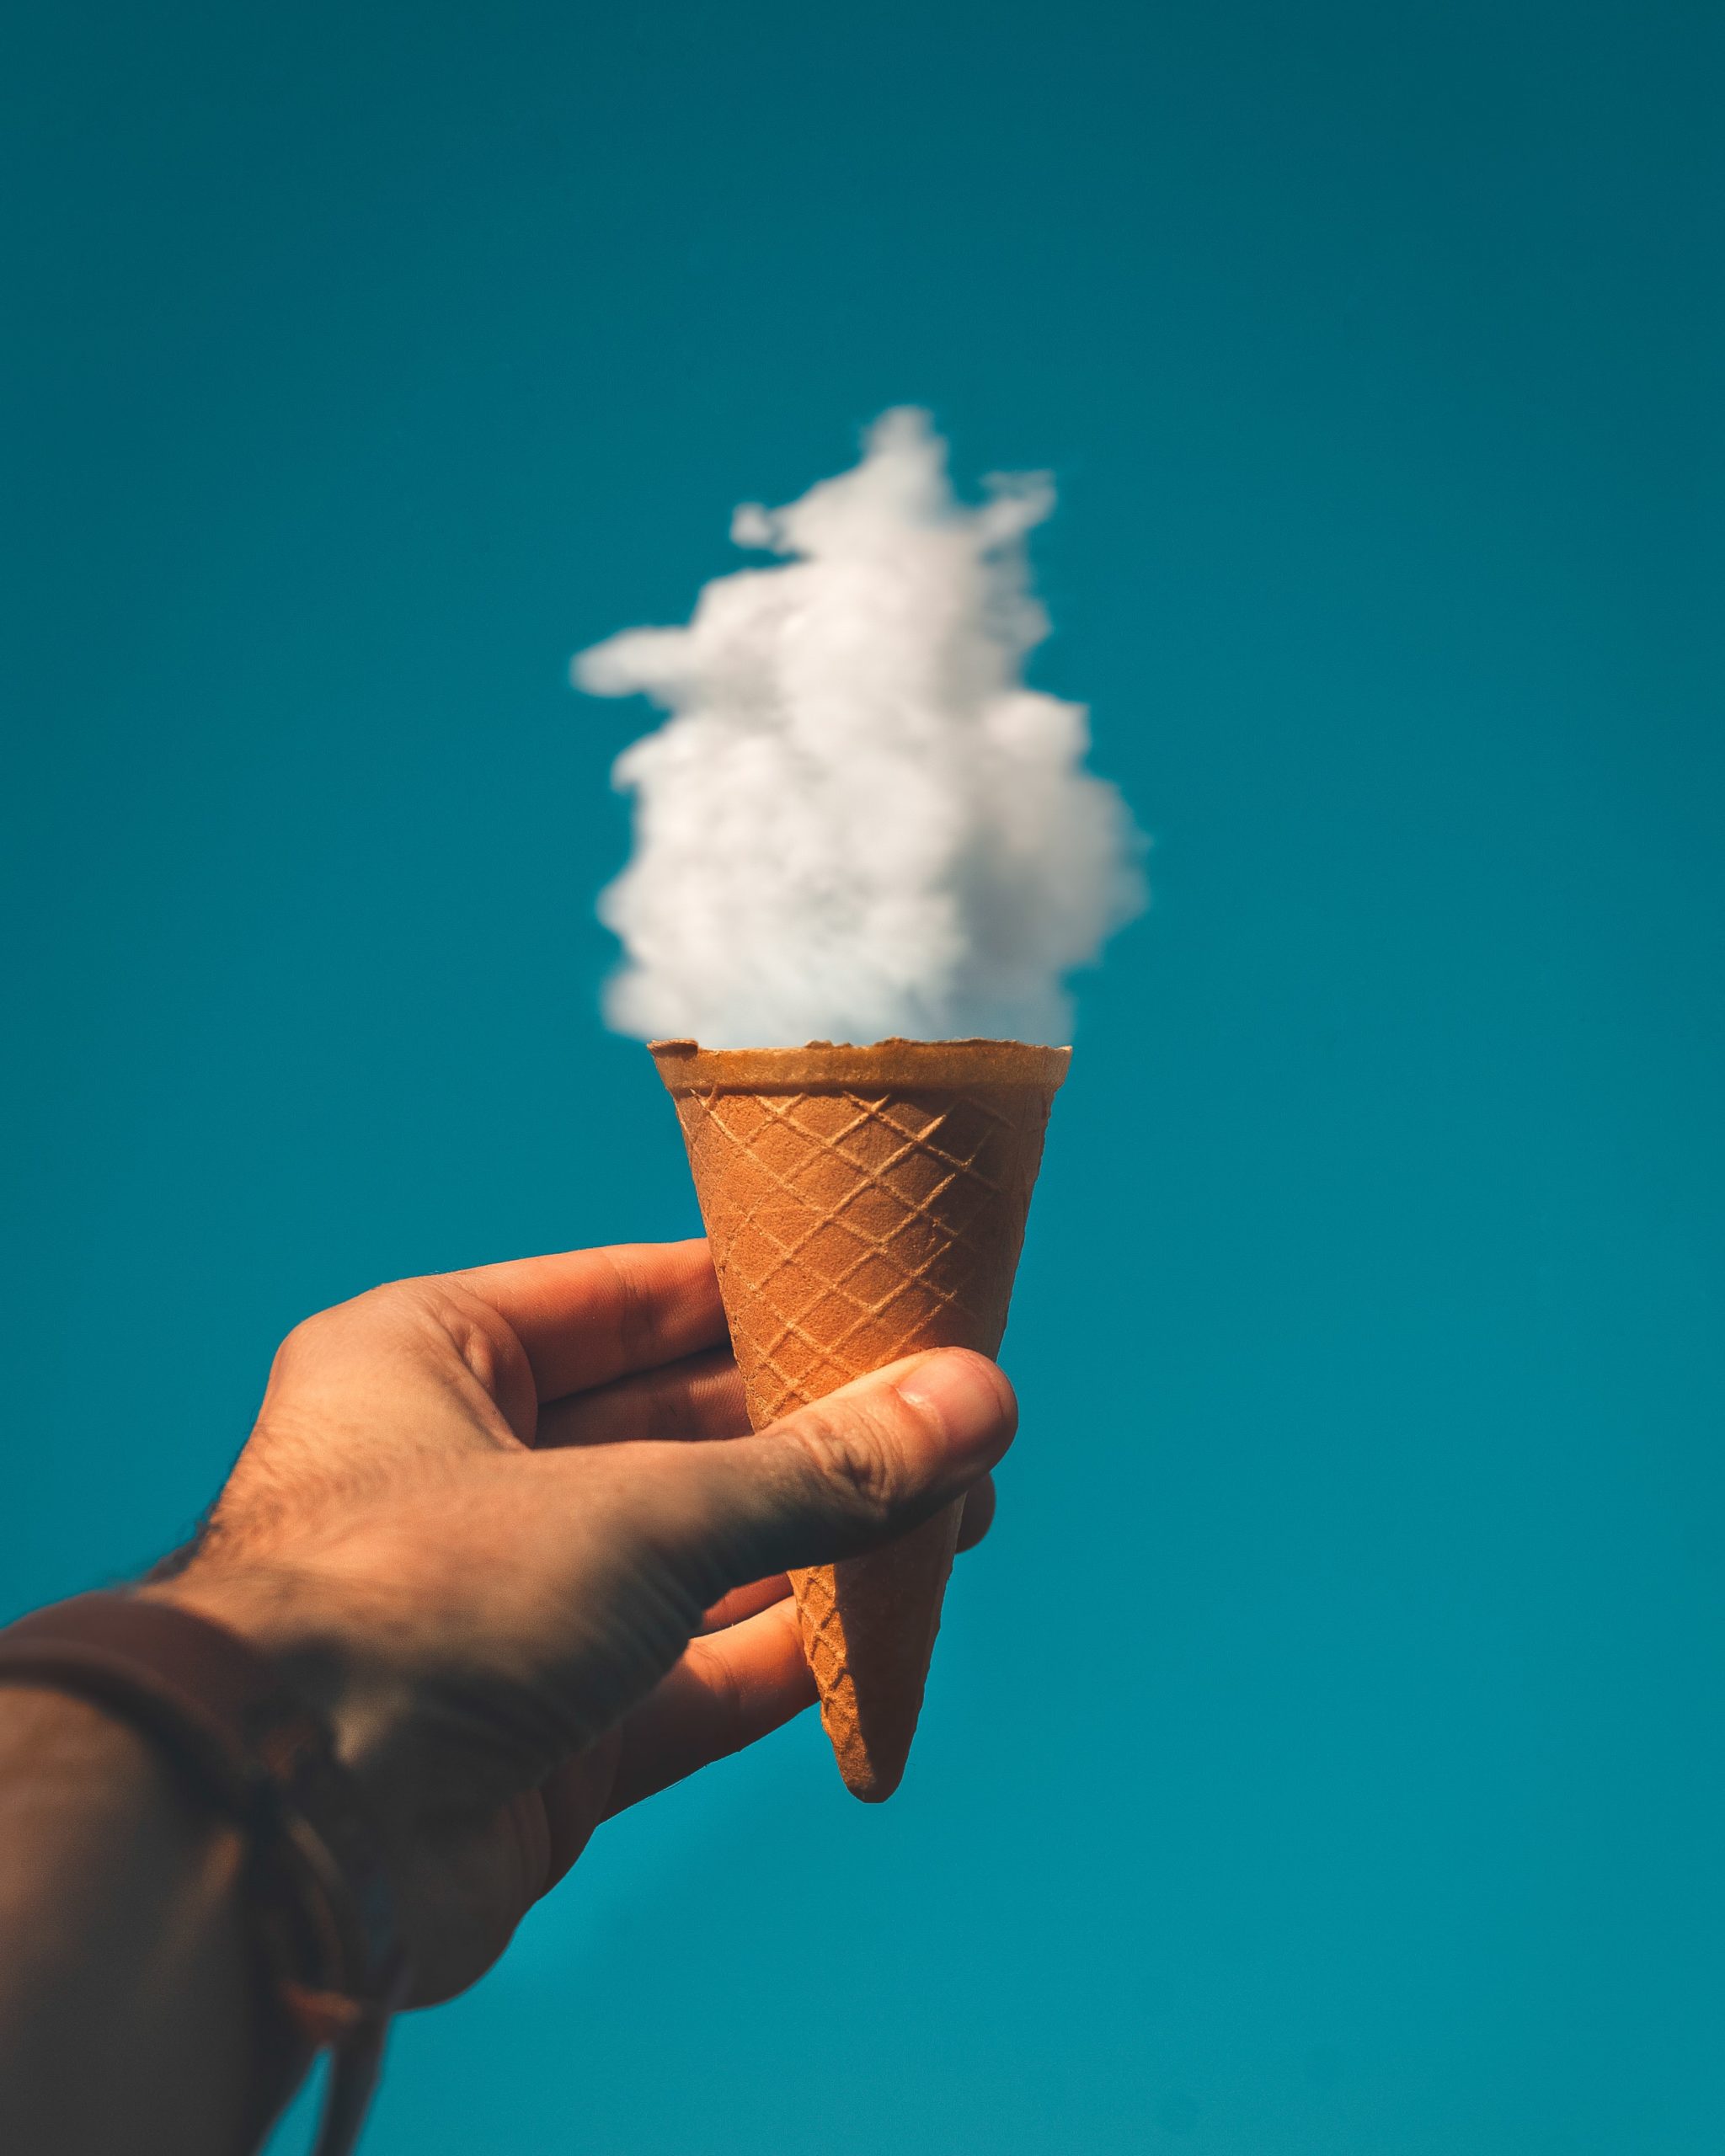 Hand holding ice cream cone with cloud inside it instead of ice cream